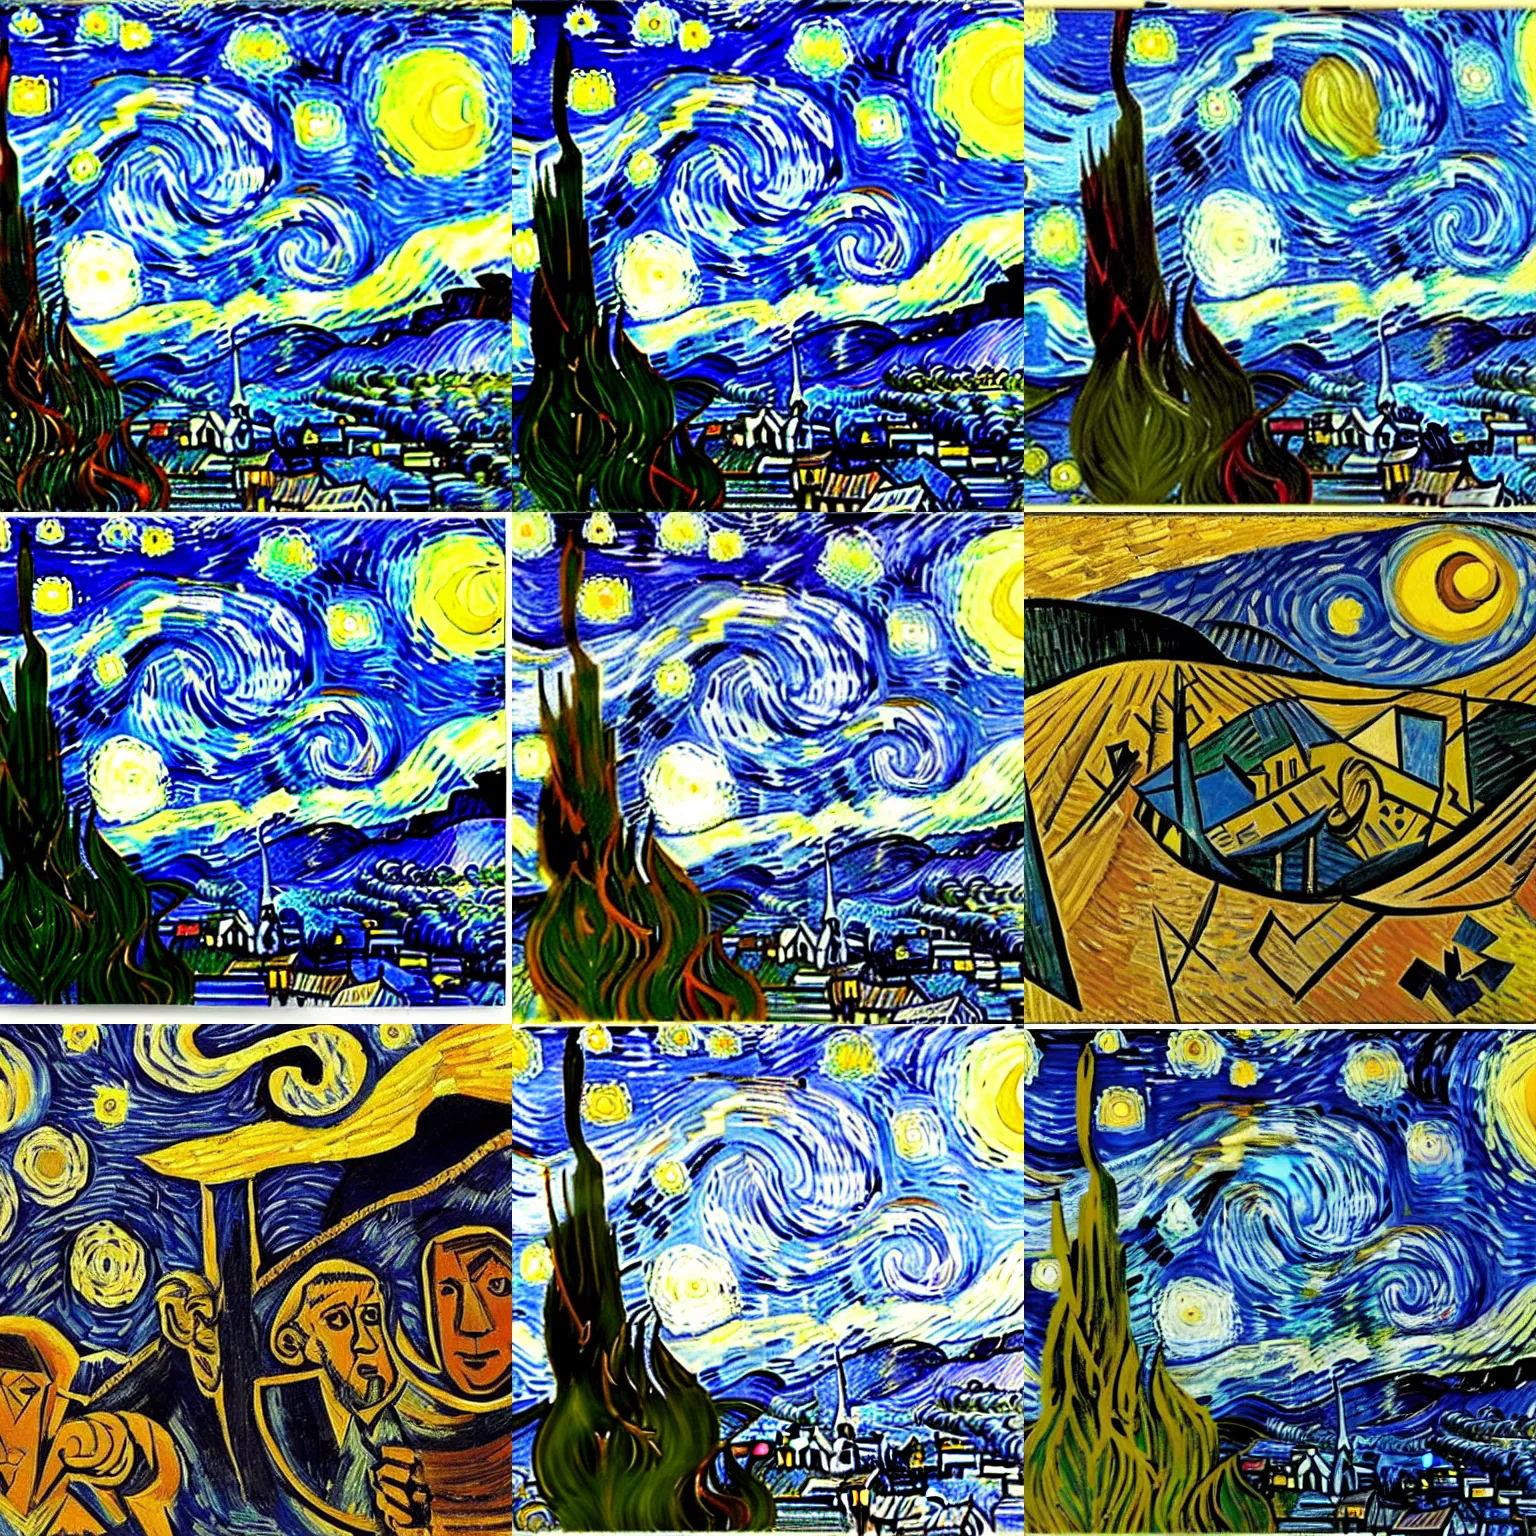 Prompt: van gogh's starry night in the cubism style, picasso, georges braque